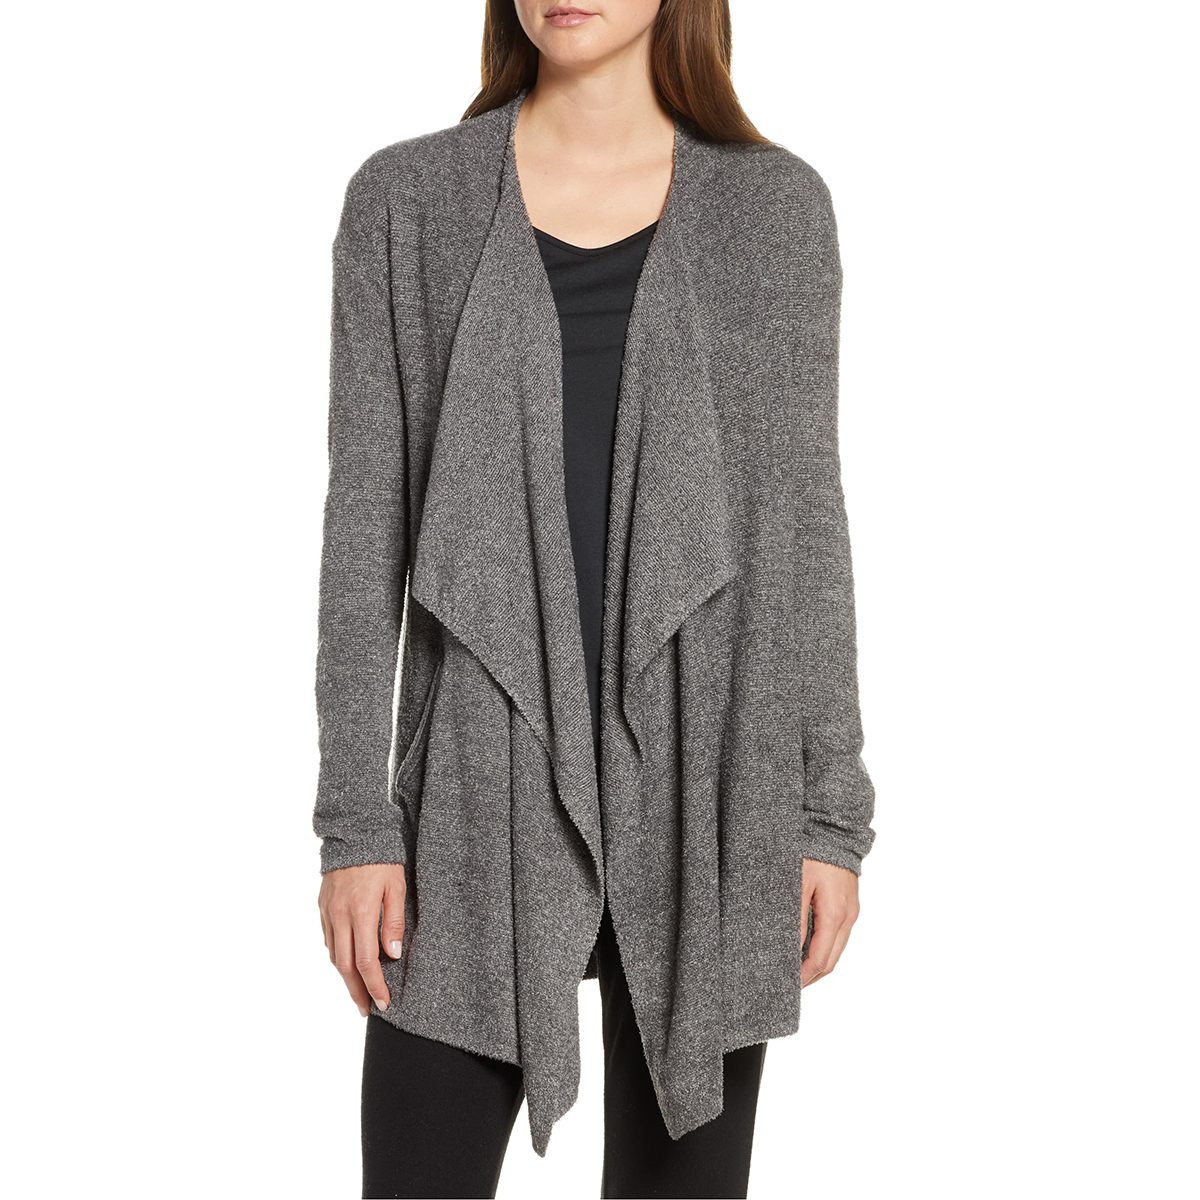 This Cardigan in the Nordstrom Anniversary Sale May Be the Coziest Ever